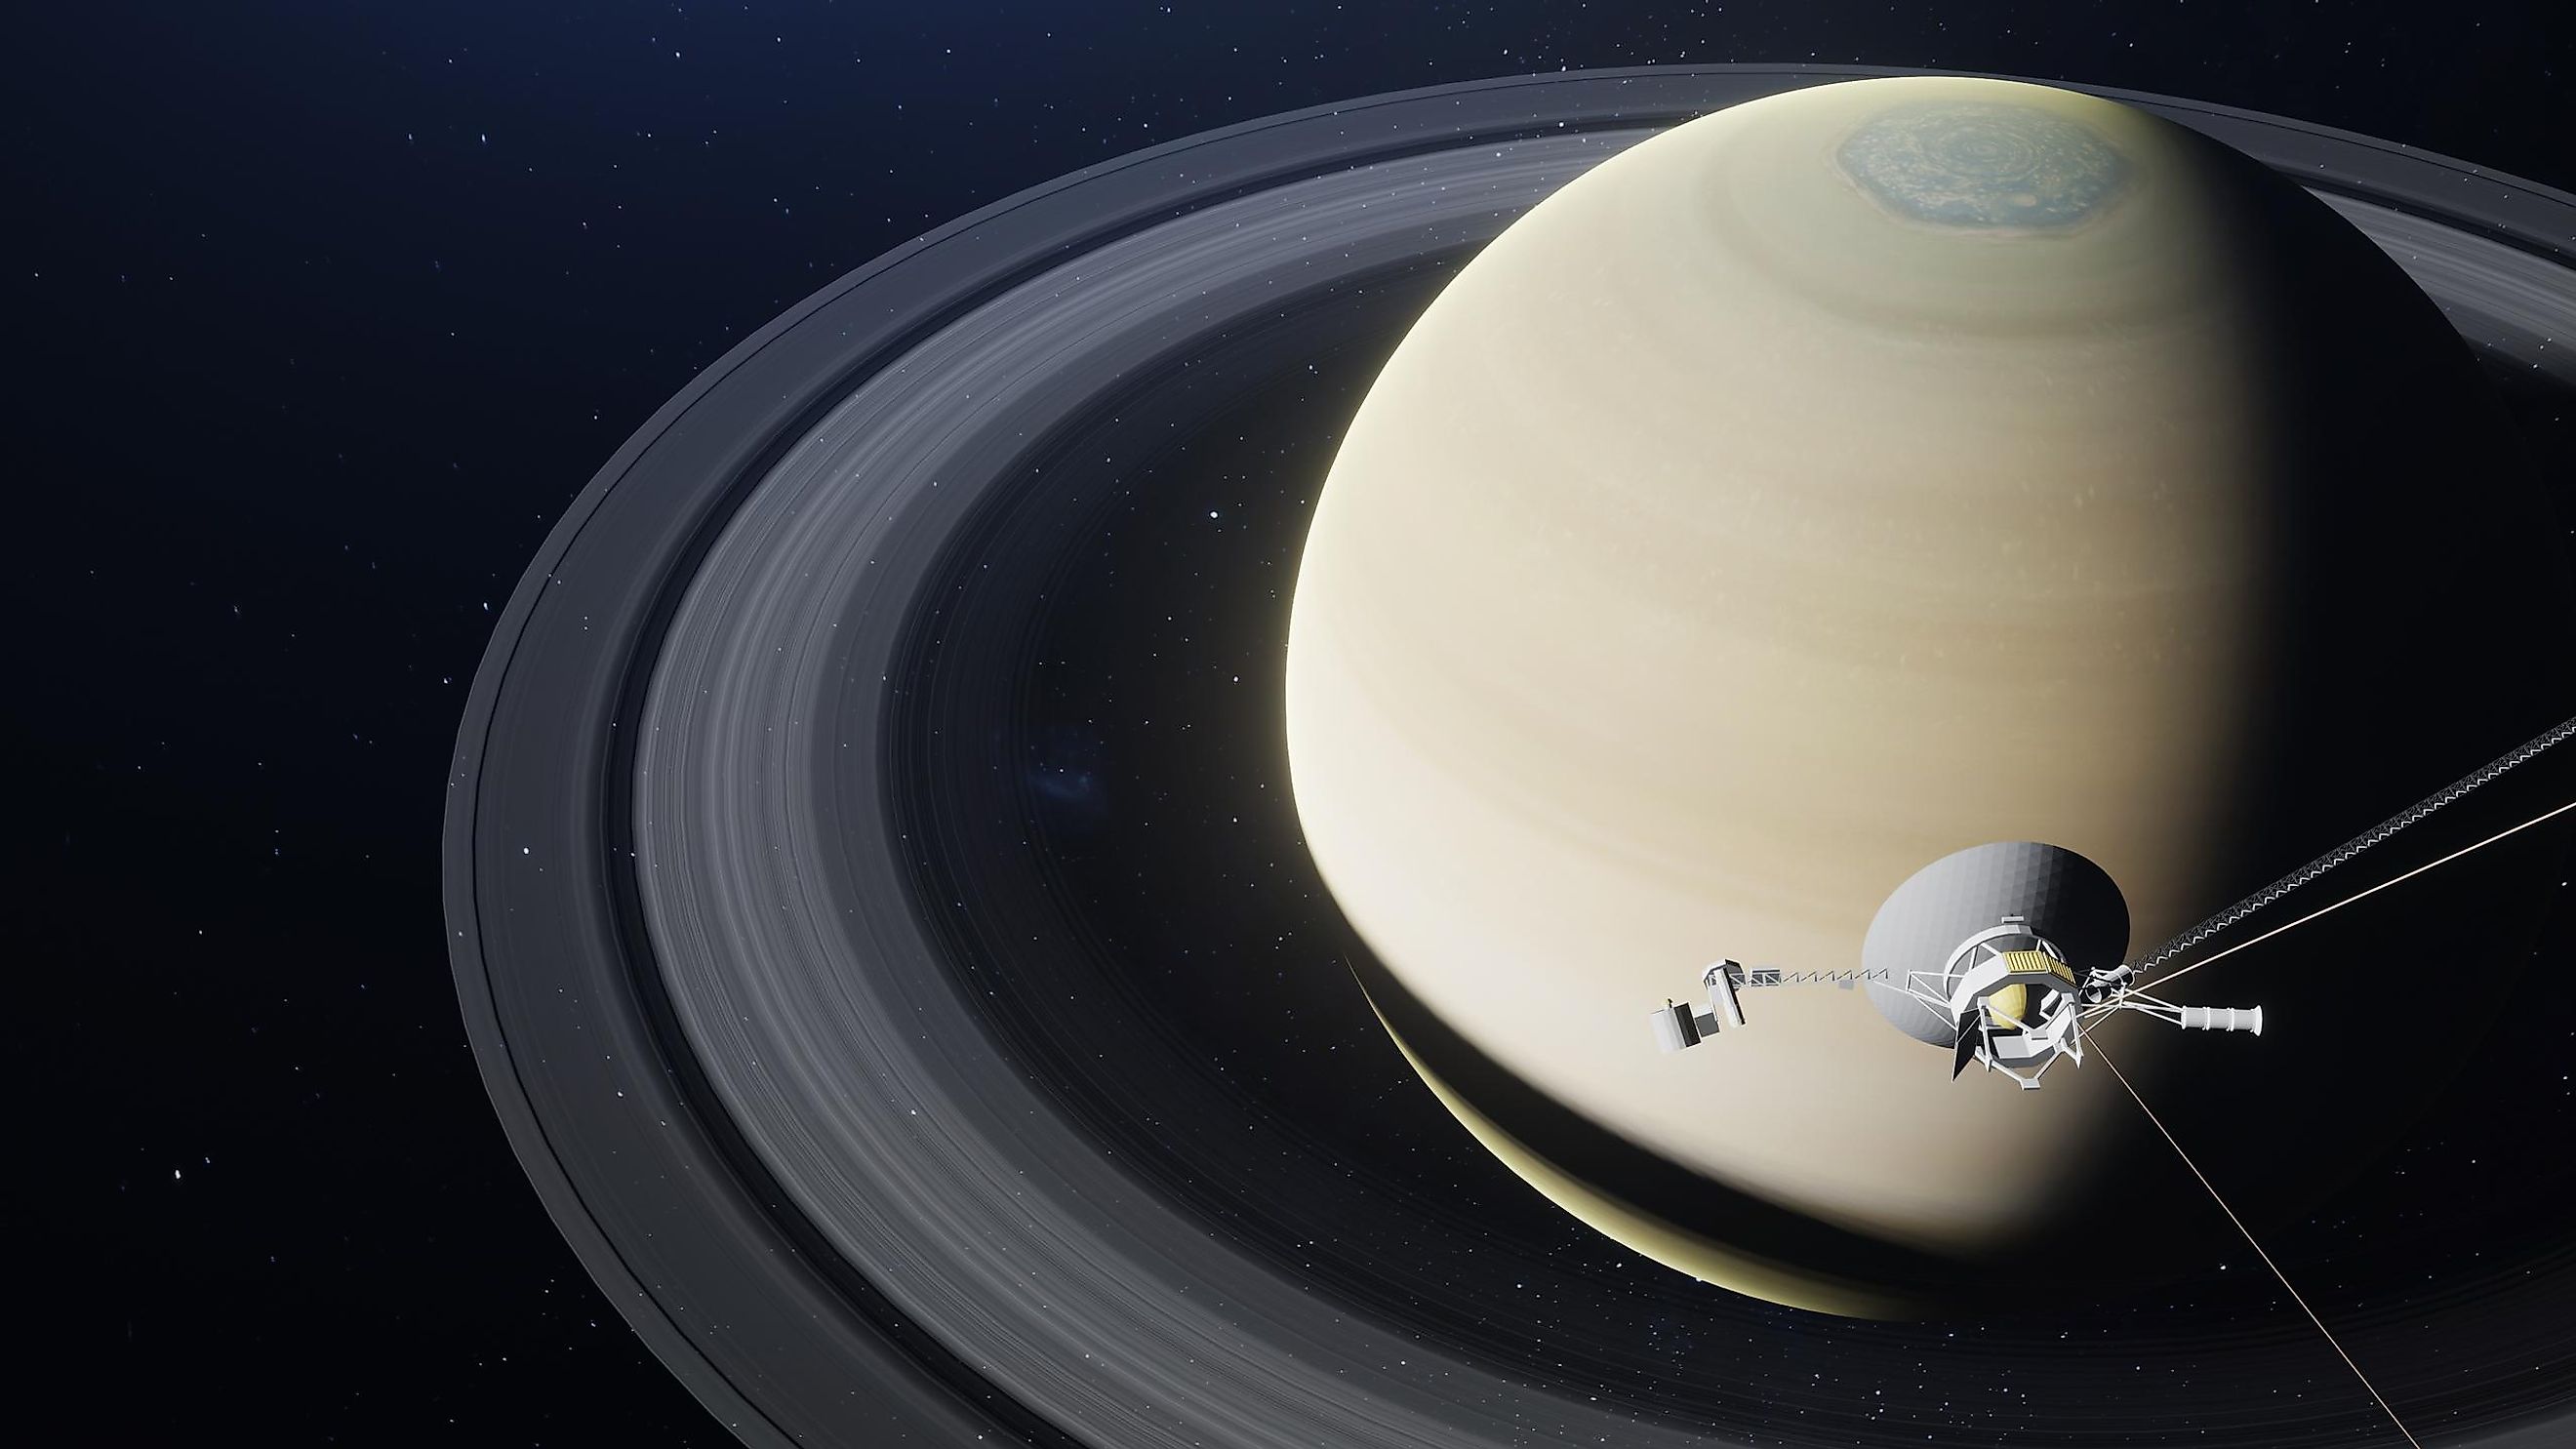 The Voyager Space Probe Approaching Saturn